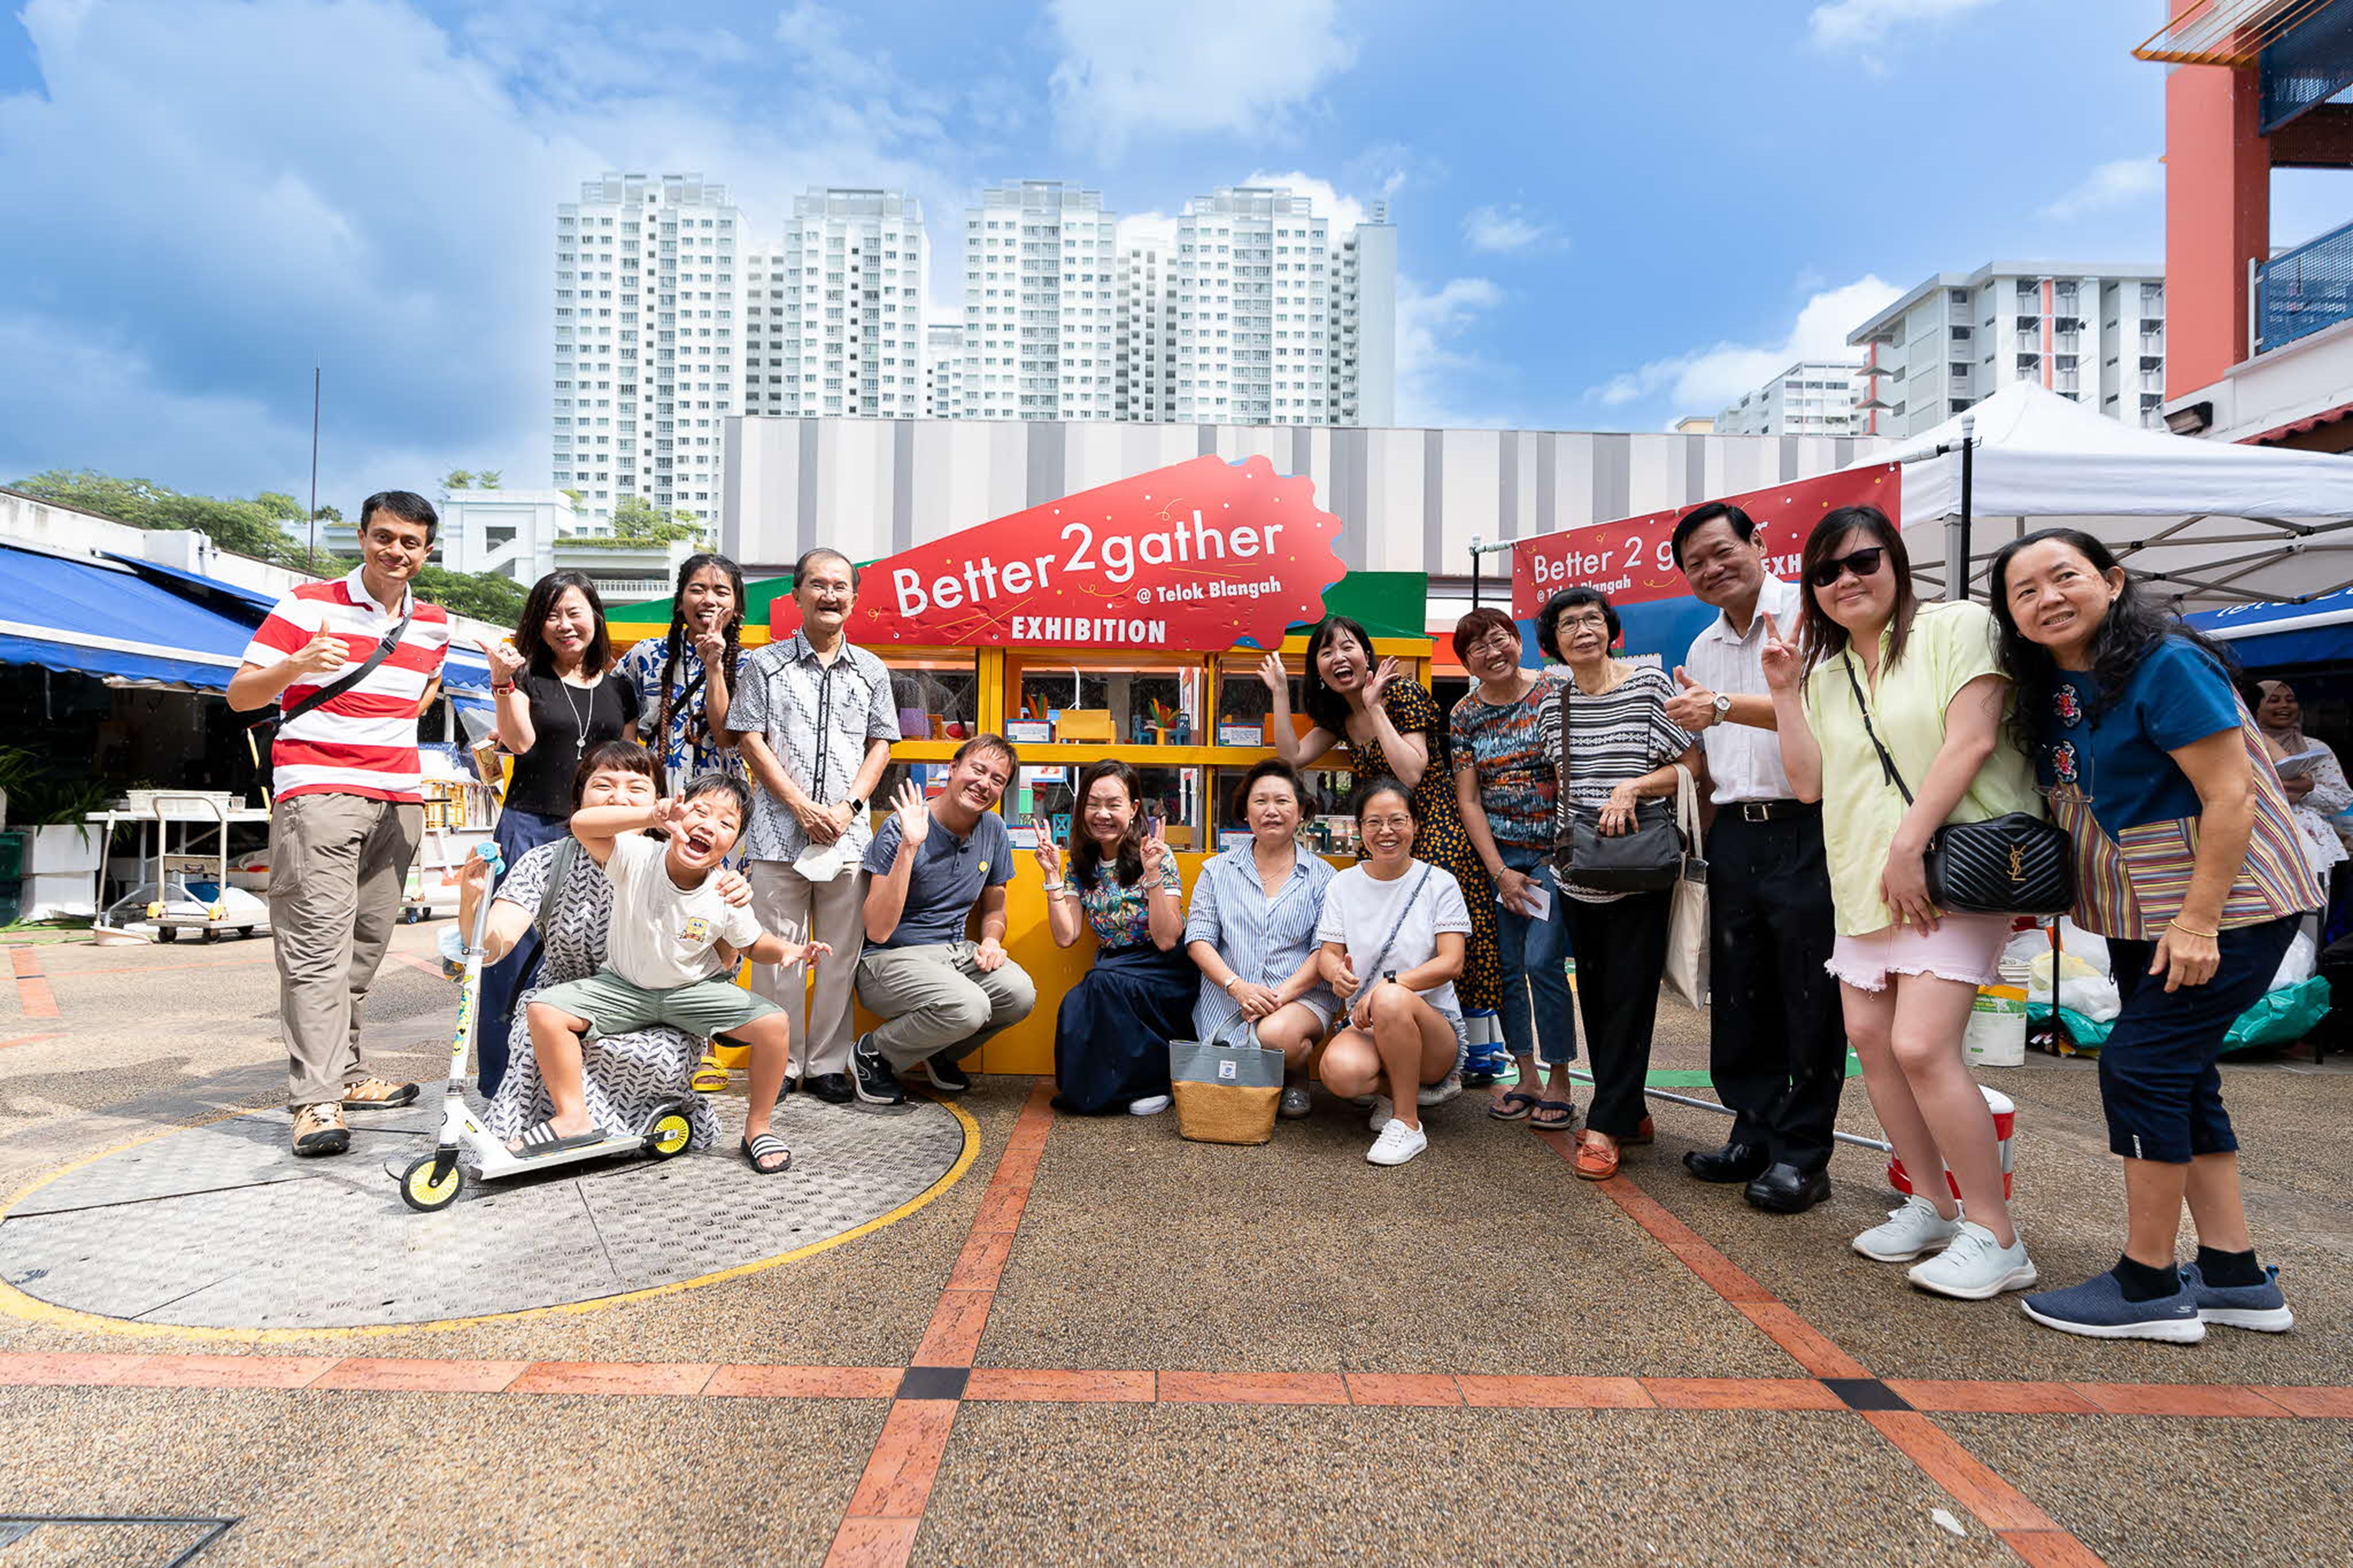 Residents of Telok Blangah and those in the south can visit “Better 2gather”, a papercraft exhibition that showcases the many stories and memories of the Telok Blangah community and neighbourhood. Image courtesy of Participate in Design.